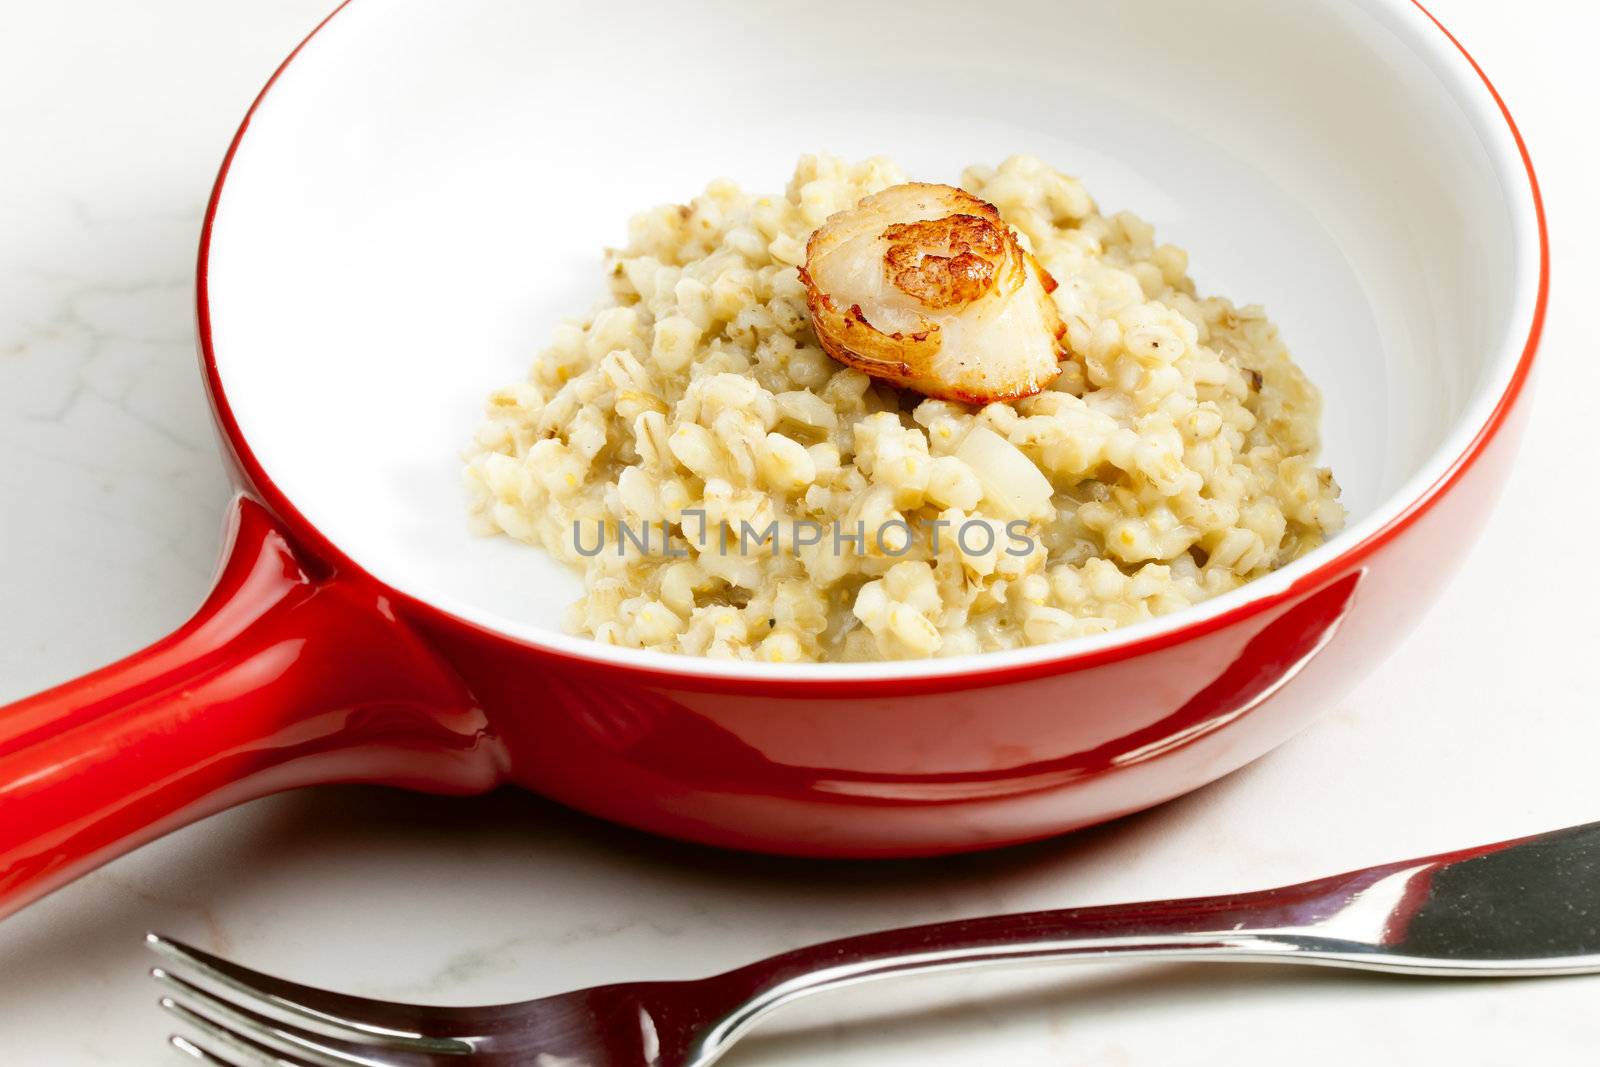 fried Saint Jacques mollusc with pearl barley risotto by phbcz